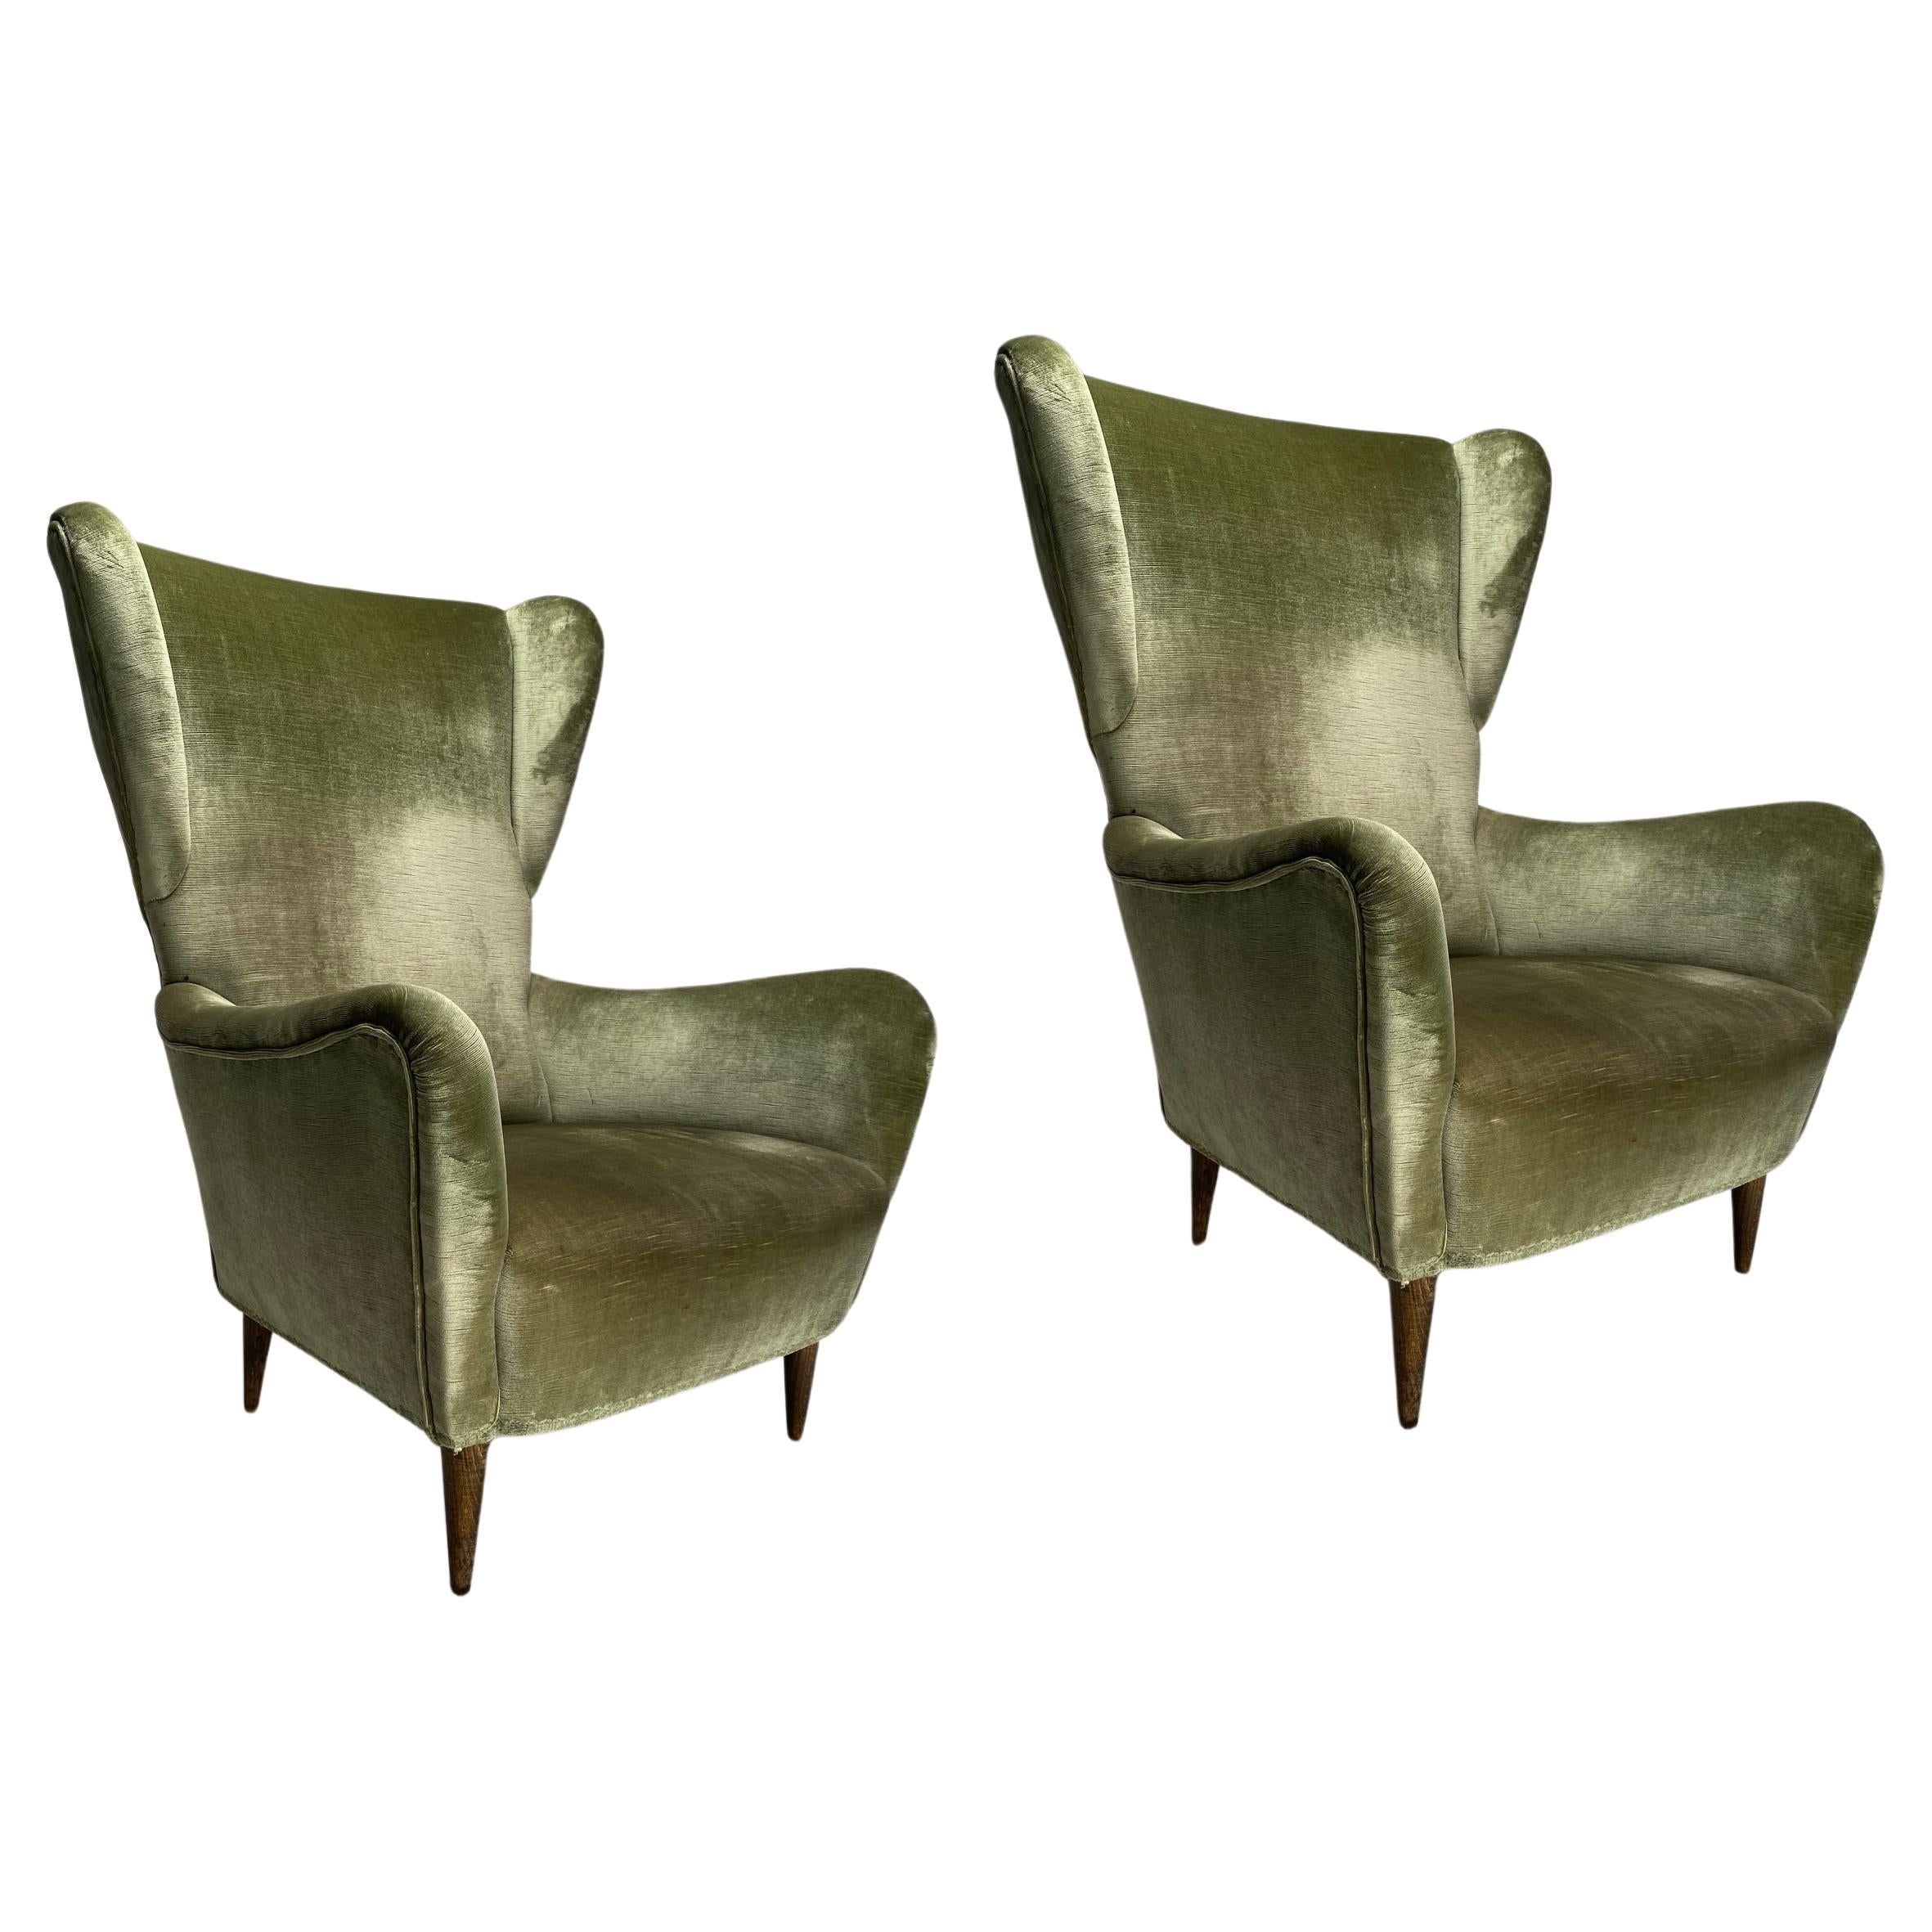 Pair of Mid-Century Armchairs, Gio Ponti Style, Italy, 1950s For Sale